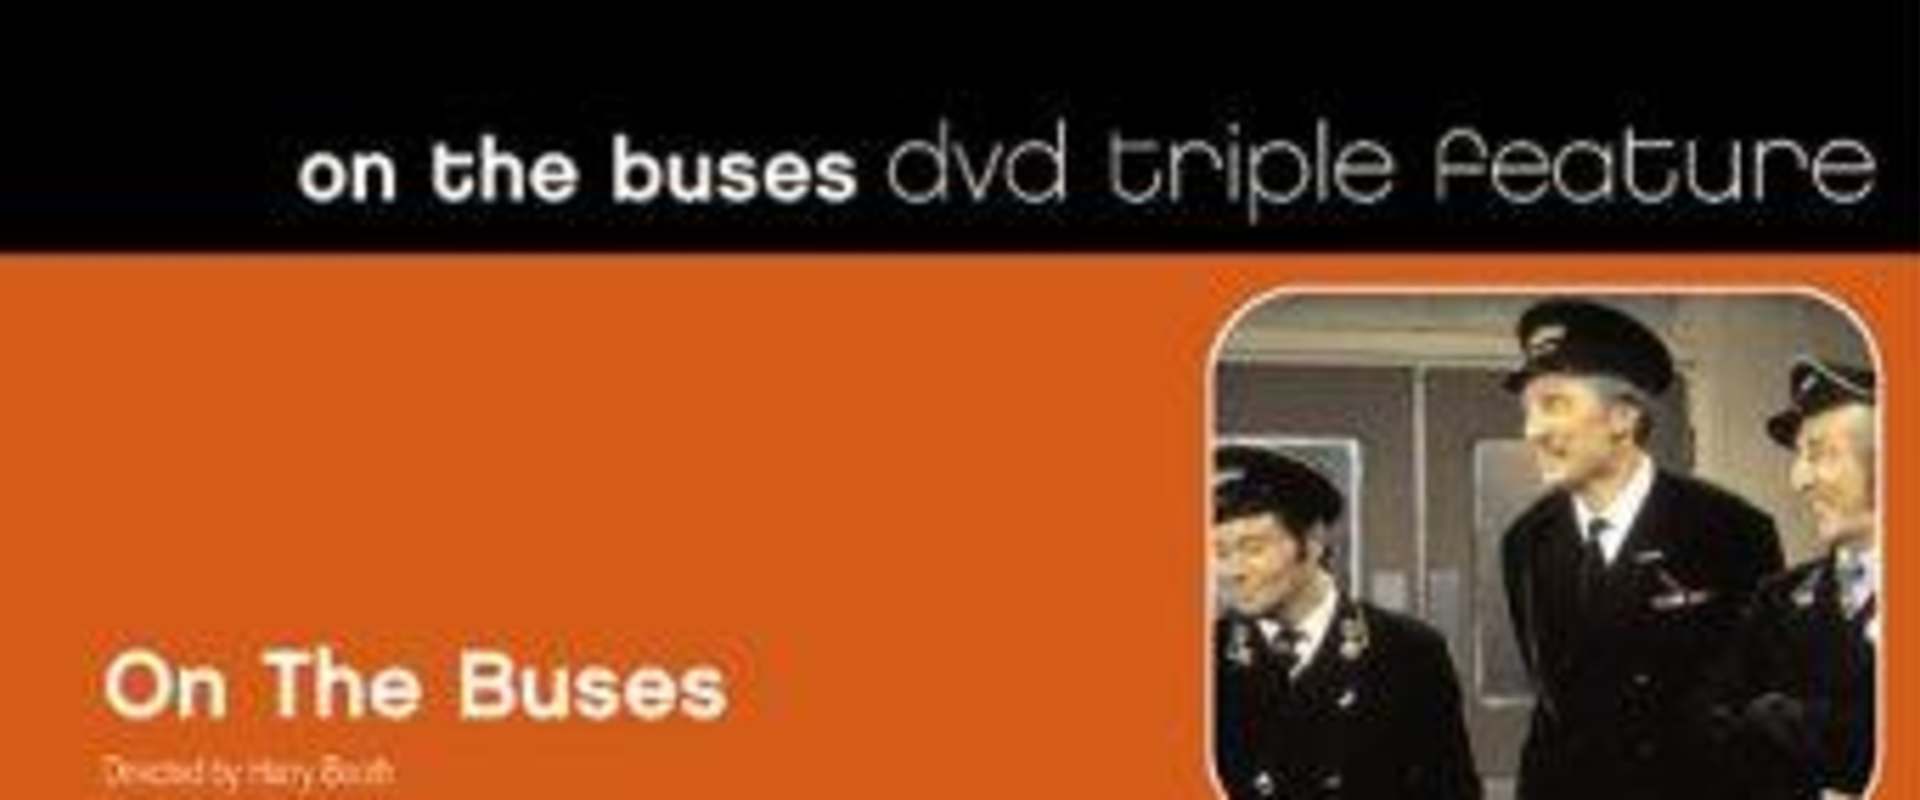 Mutiny on the Buses background 2